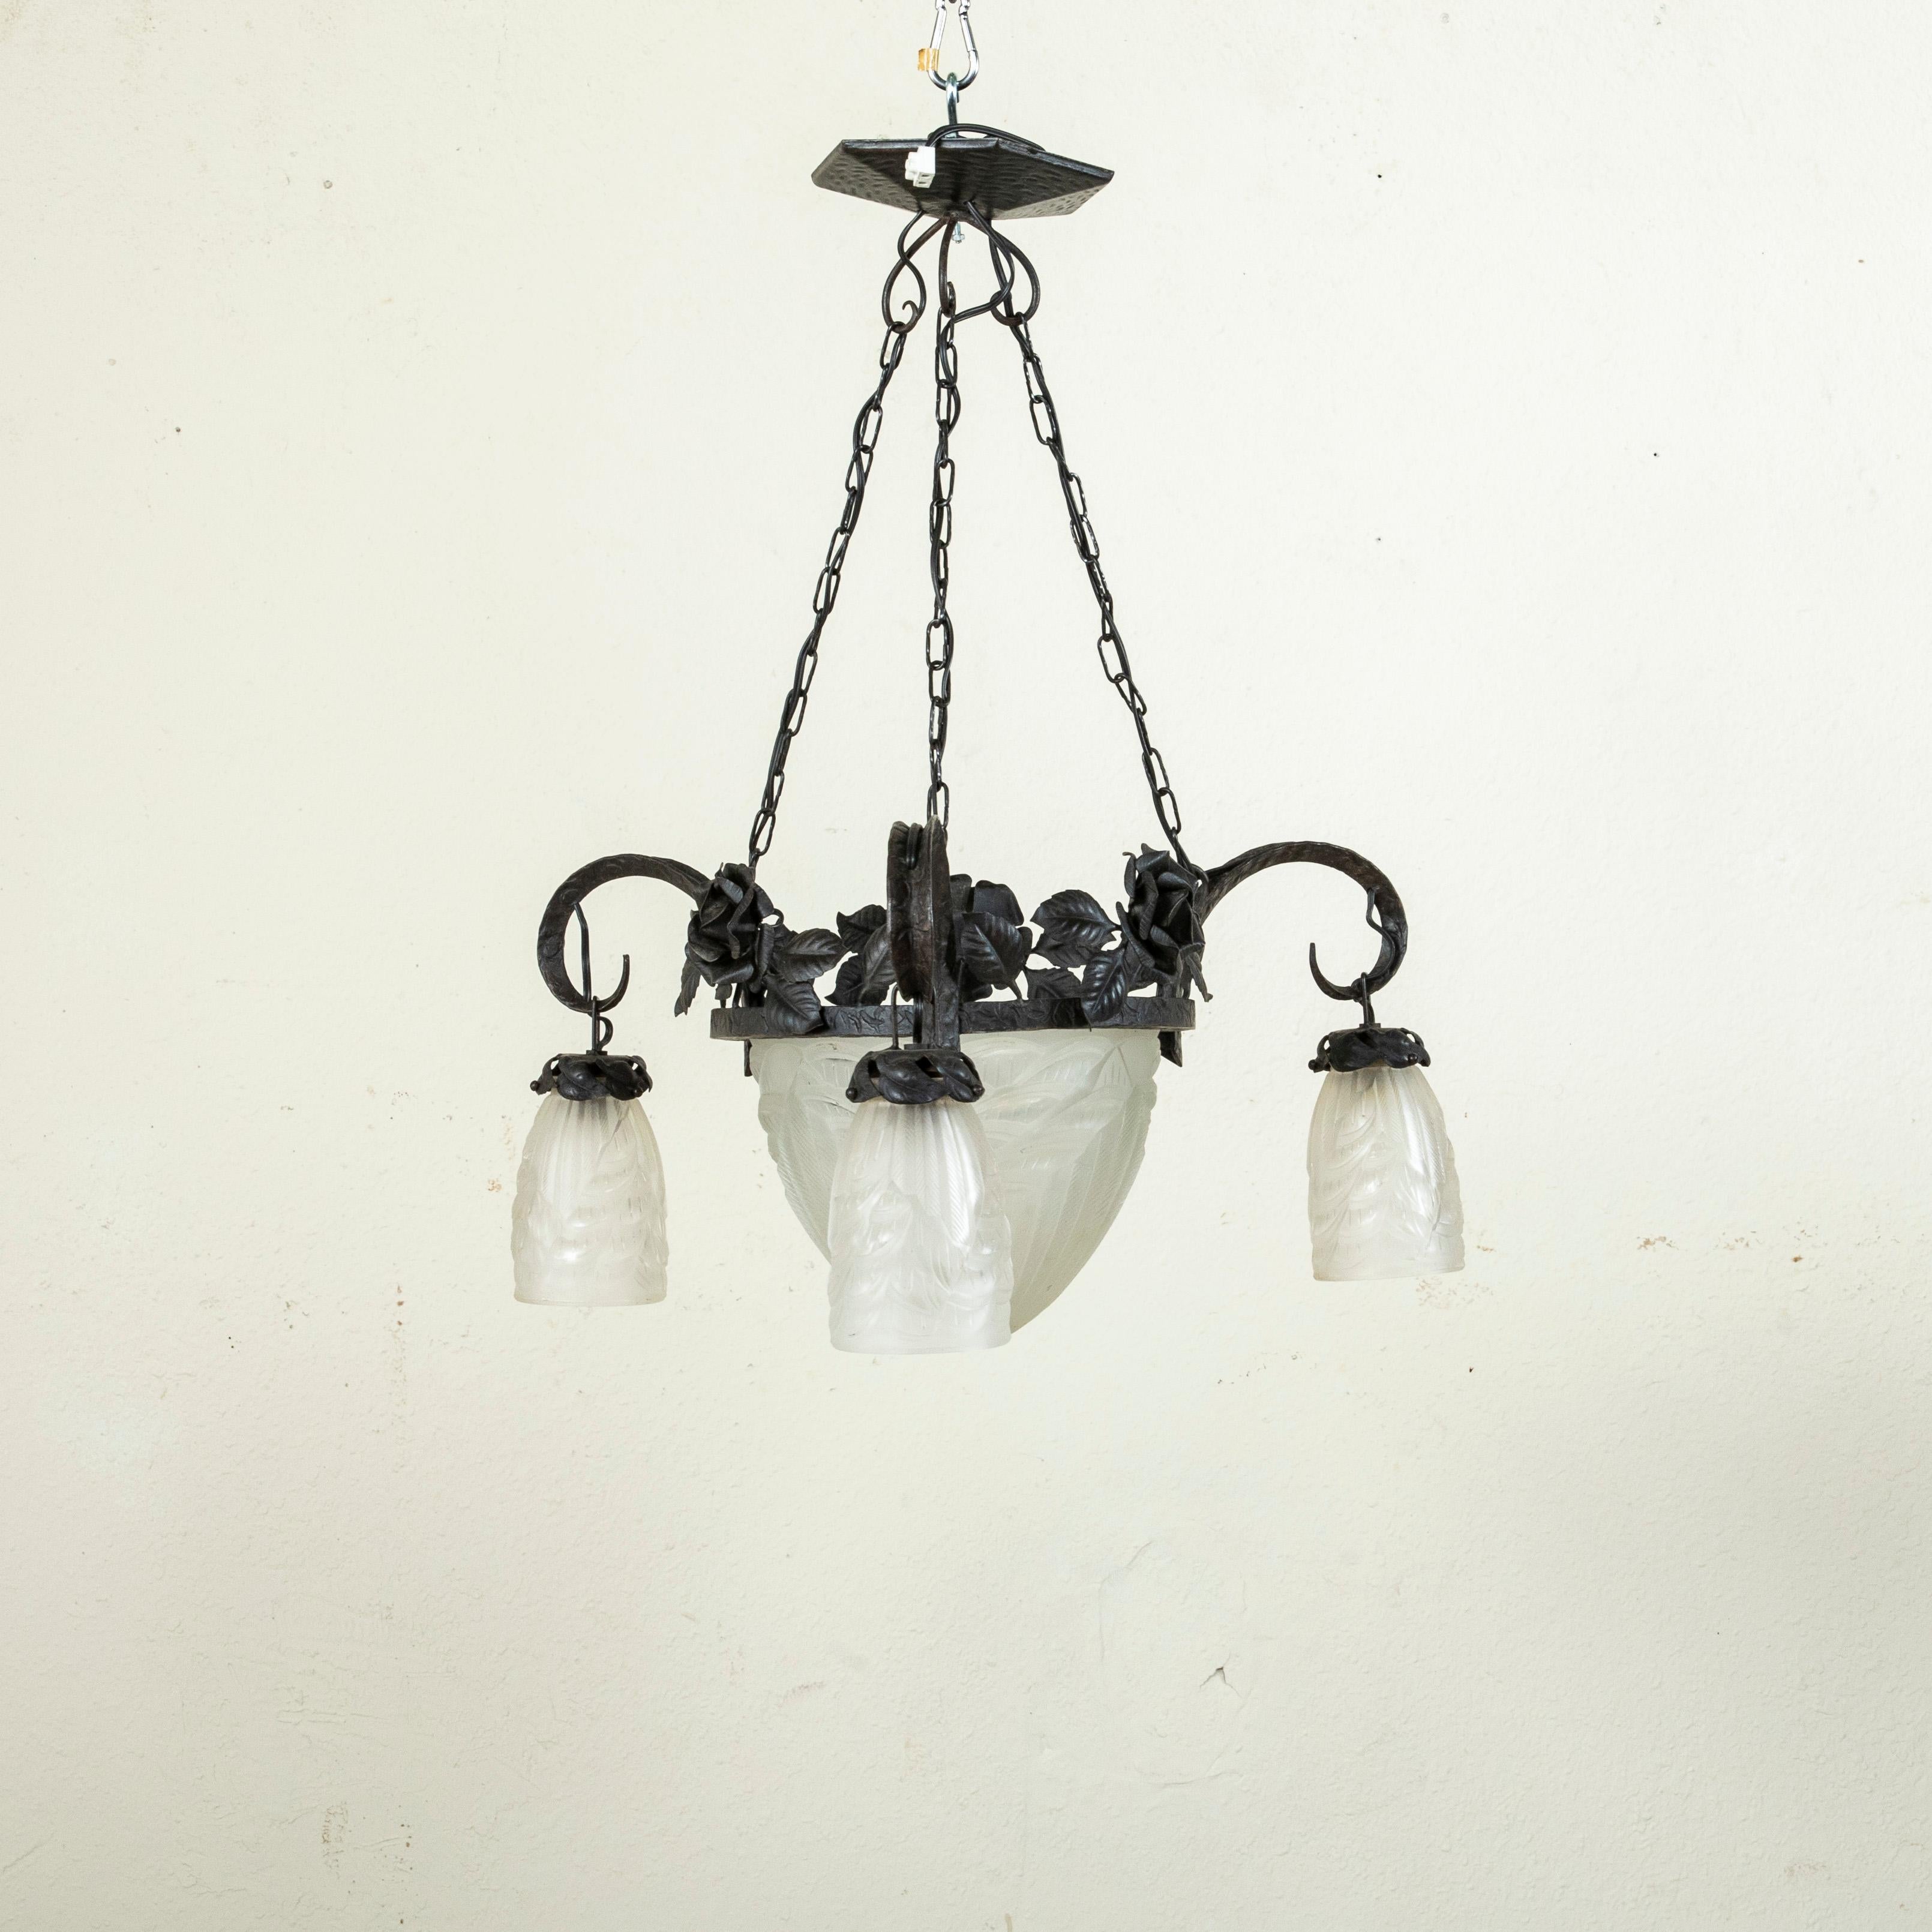 Early 20th Century French Art Deco Period Iron and Glass Chandelier, Four Lights For Sale 1